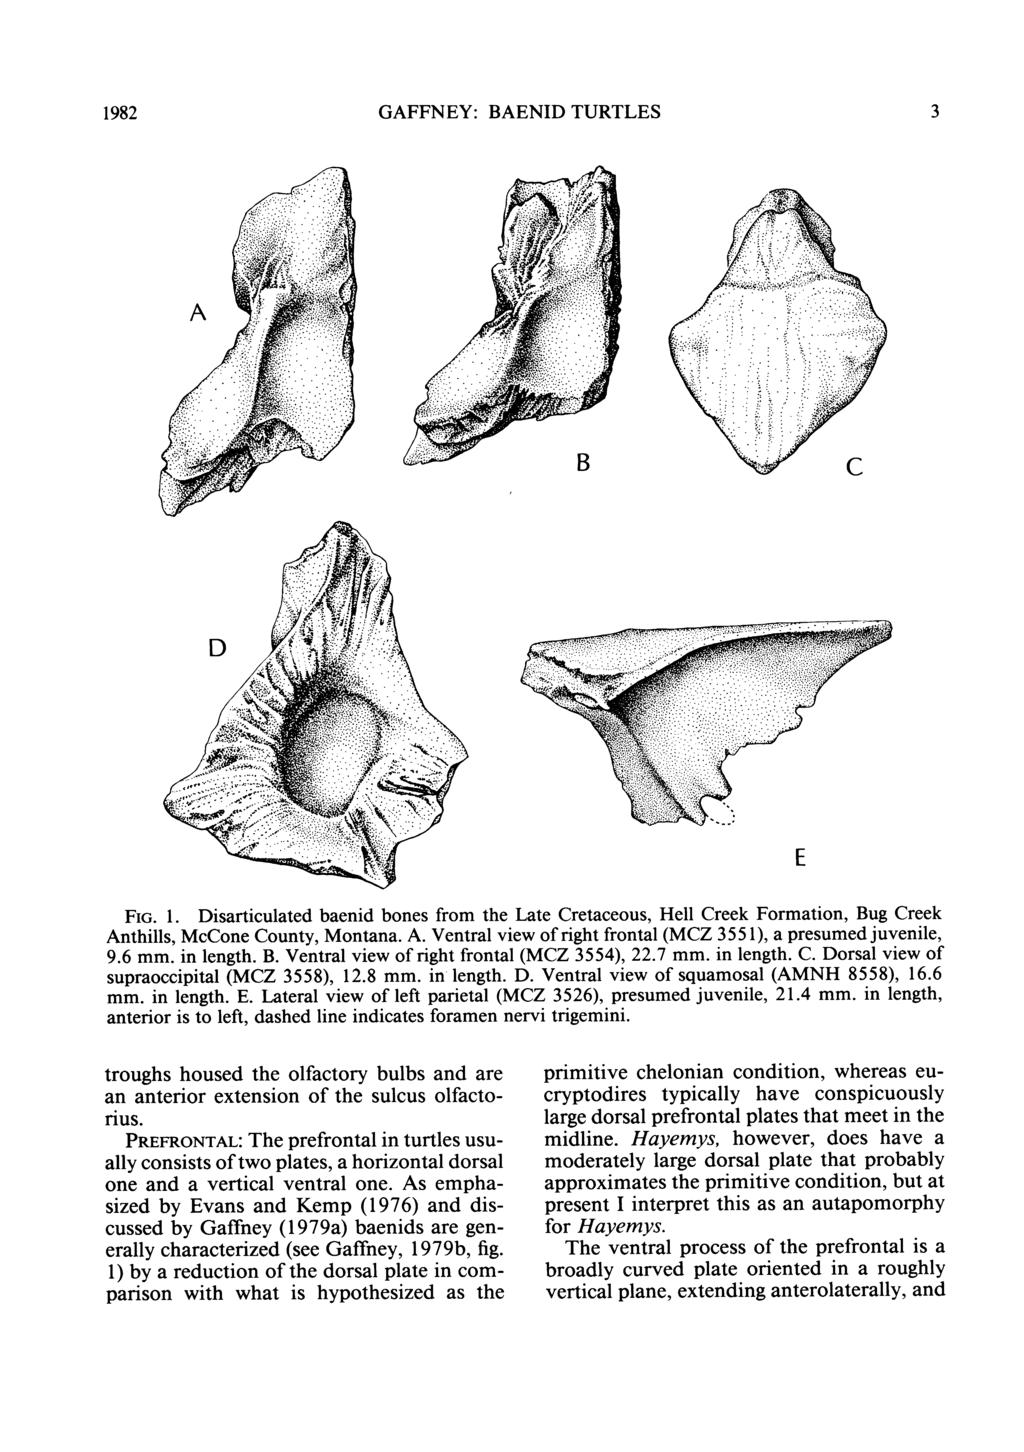 1982 GAFFNEY: BAENID TURTLES 3 FIG. 1. Disarticulated baenid bones from the Late Cretaceous, Hell Creek Formation, Bug Creek Anthills, McCone County, Montana. A. Ventral view of right frontal (MCZ 355 1), a presumed juvenile, 9.